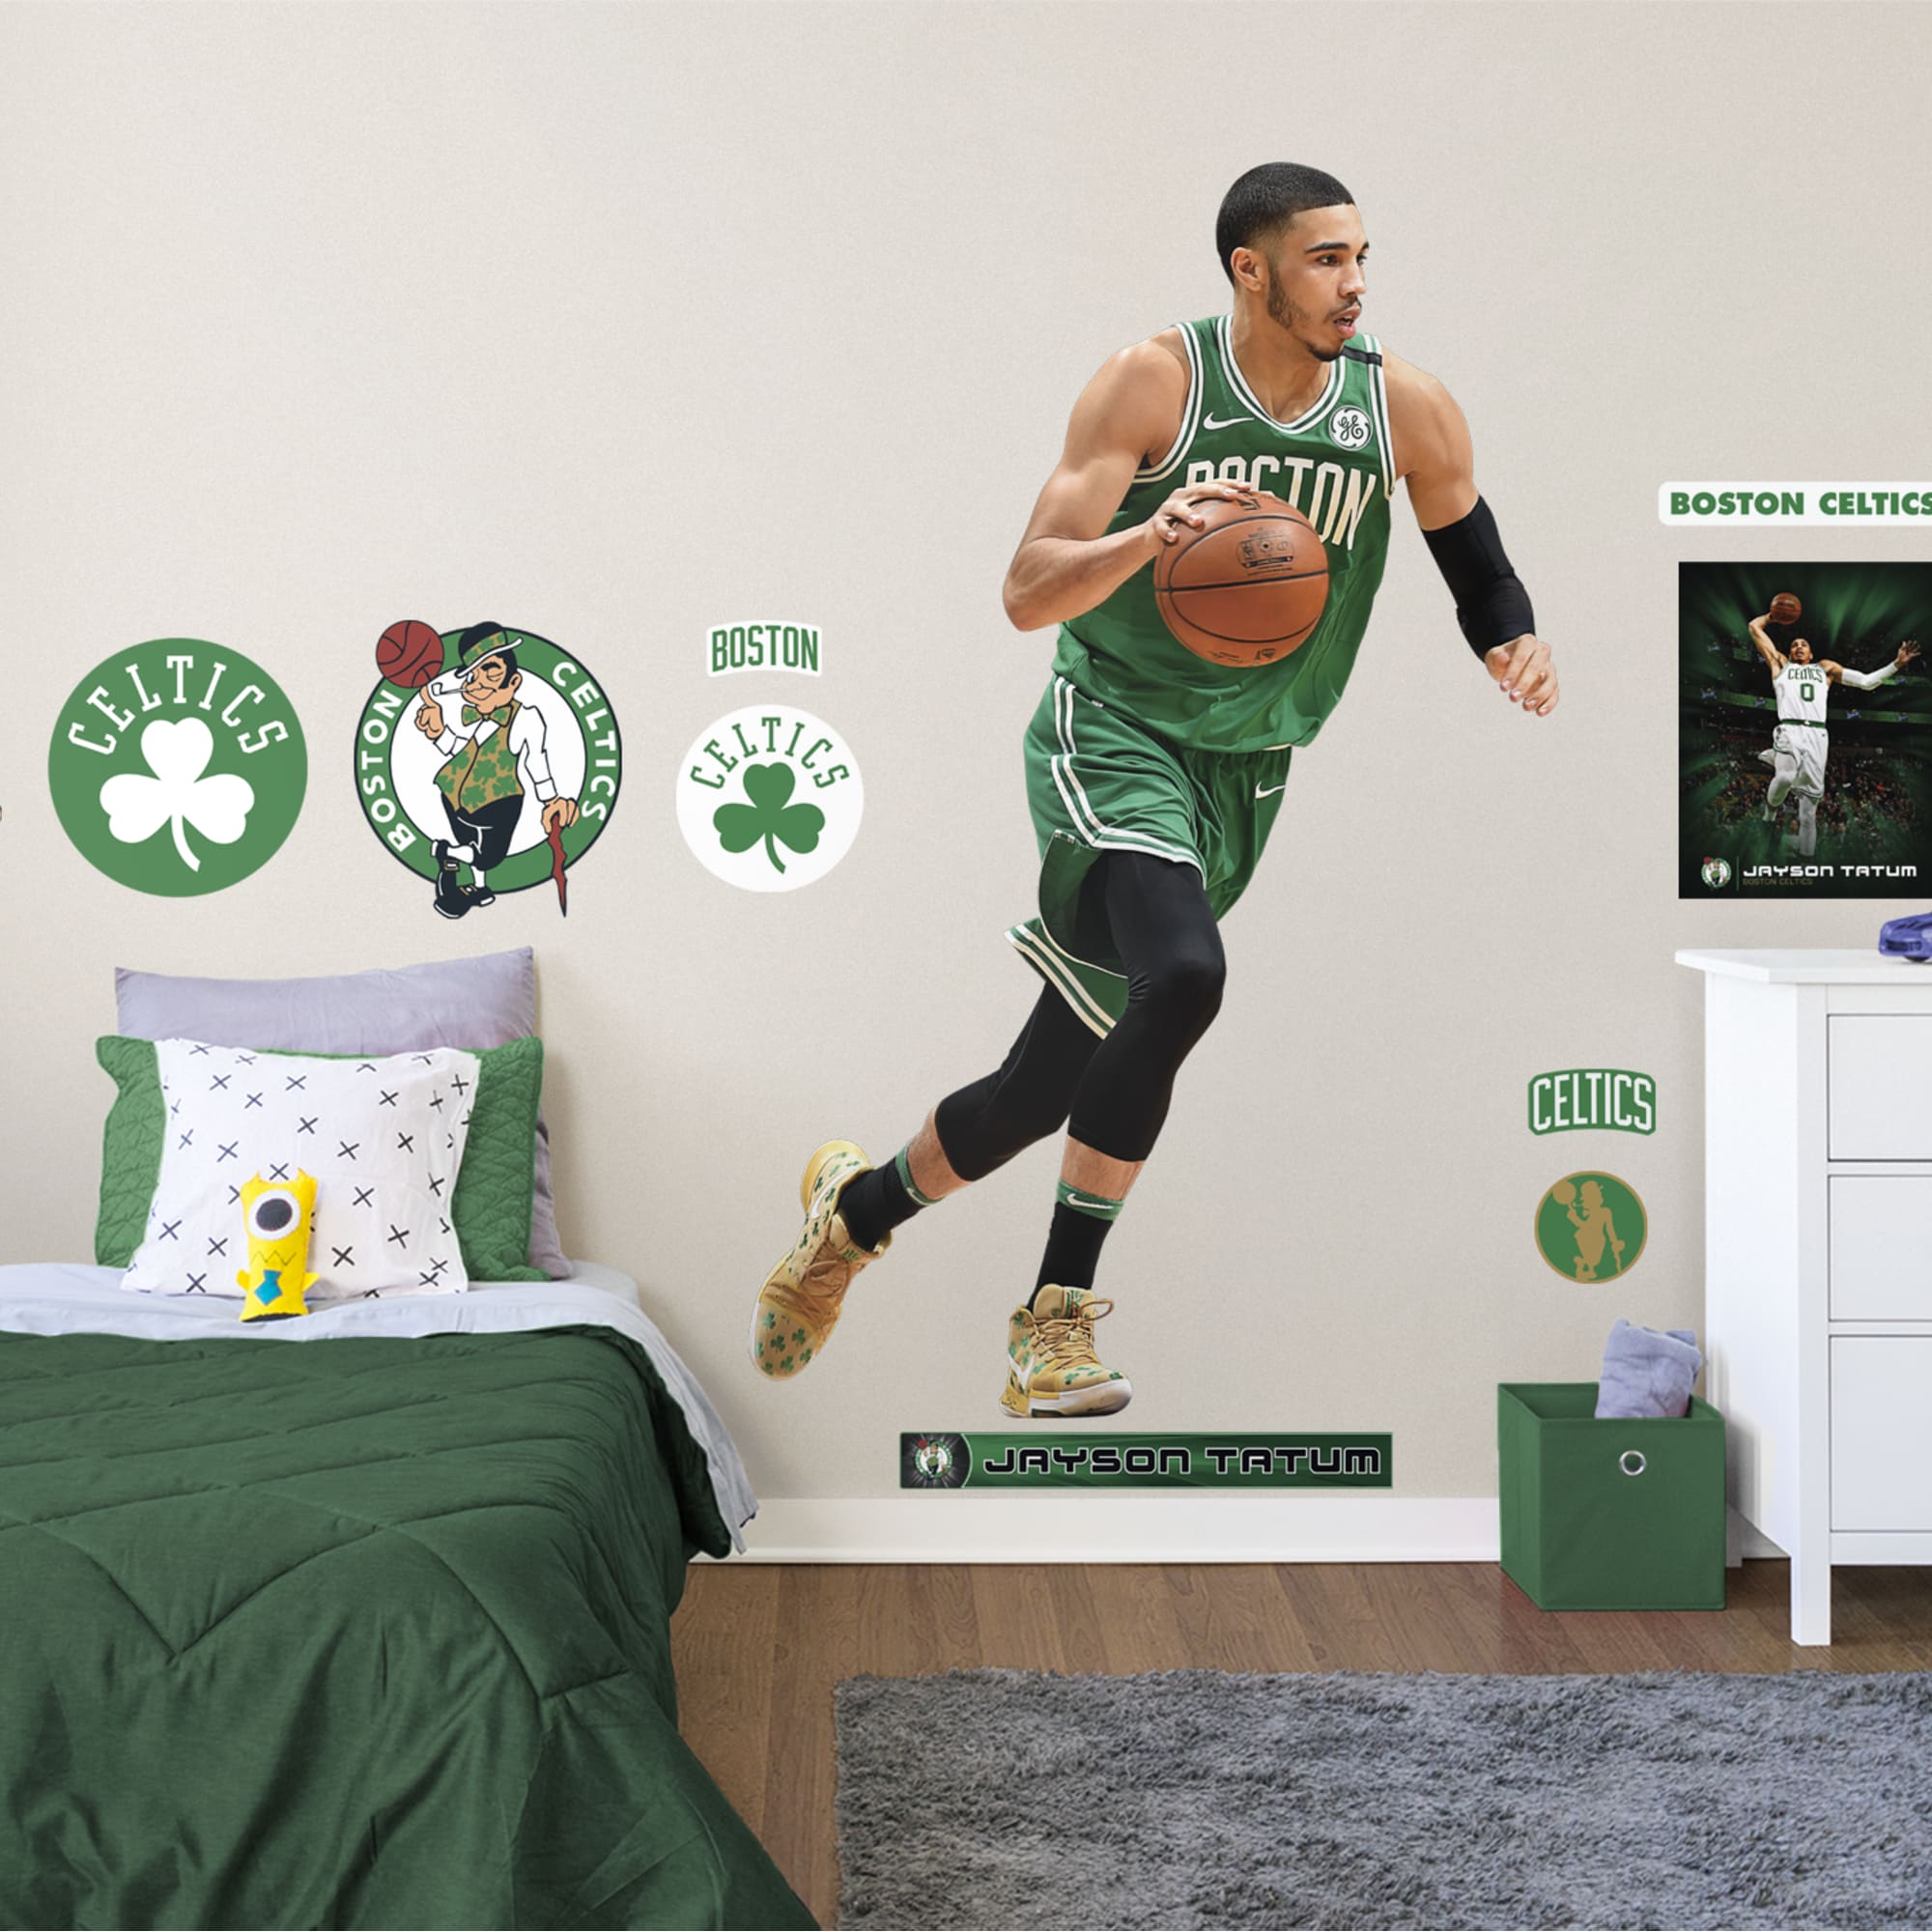 Jayson Tatum for Boston Celtics - Officially Licensed NBA Removable Wall Decal Life-Size Athlete + 11 Decals (50"W x 78"H) by Fa